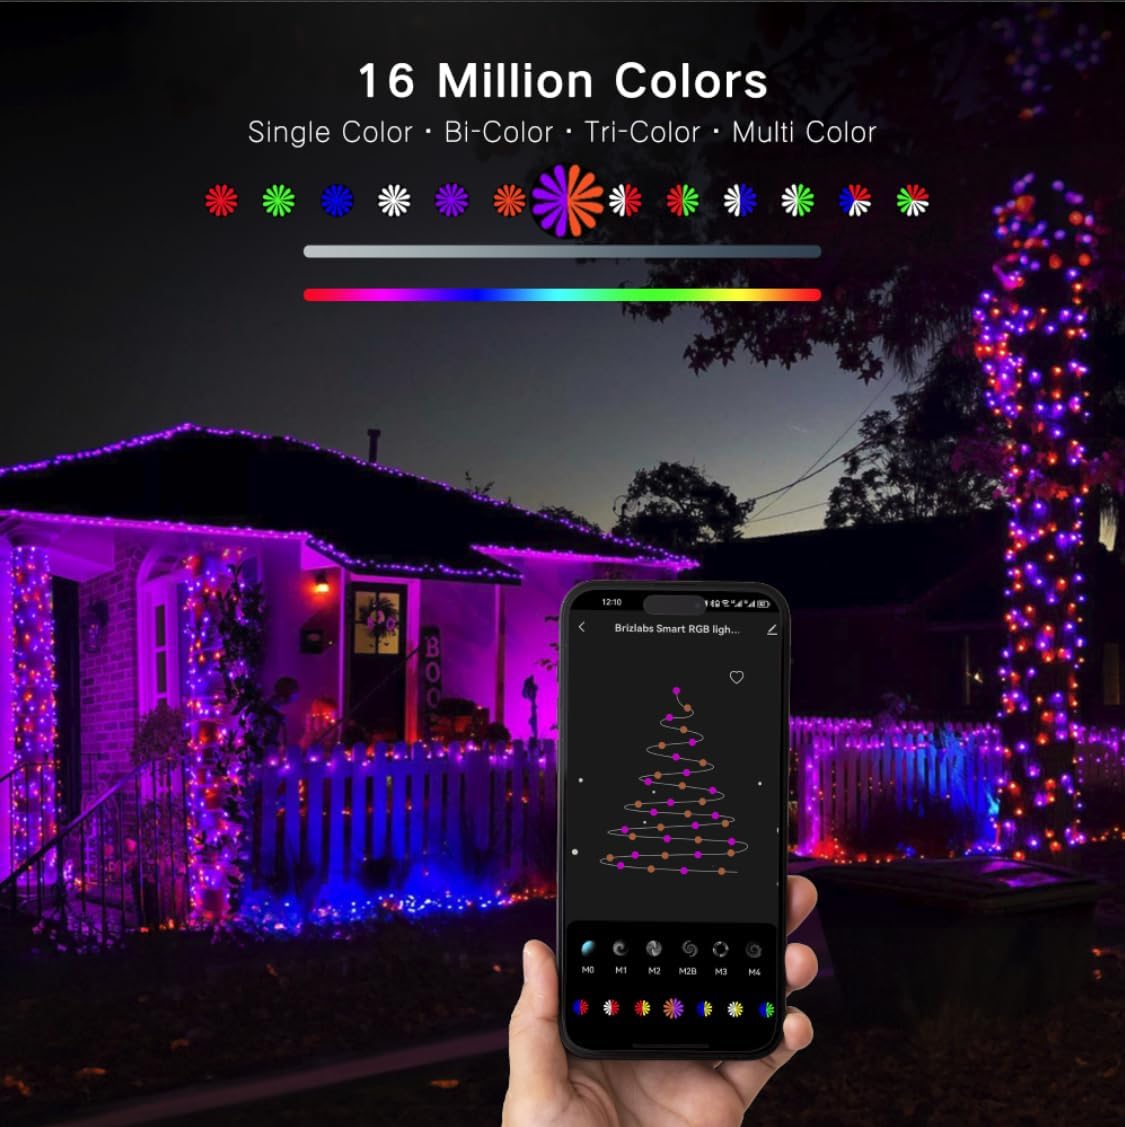 BrizLabs RGB Christmas Lights, 163ft 498 LED Smart String Lights App Controlled, Dimmable Color Changing Christmas Lights, Xmas Tree Lights Work with Alexa & Google Home for Outdoor Indoor Party Decor